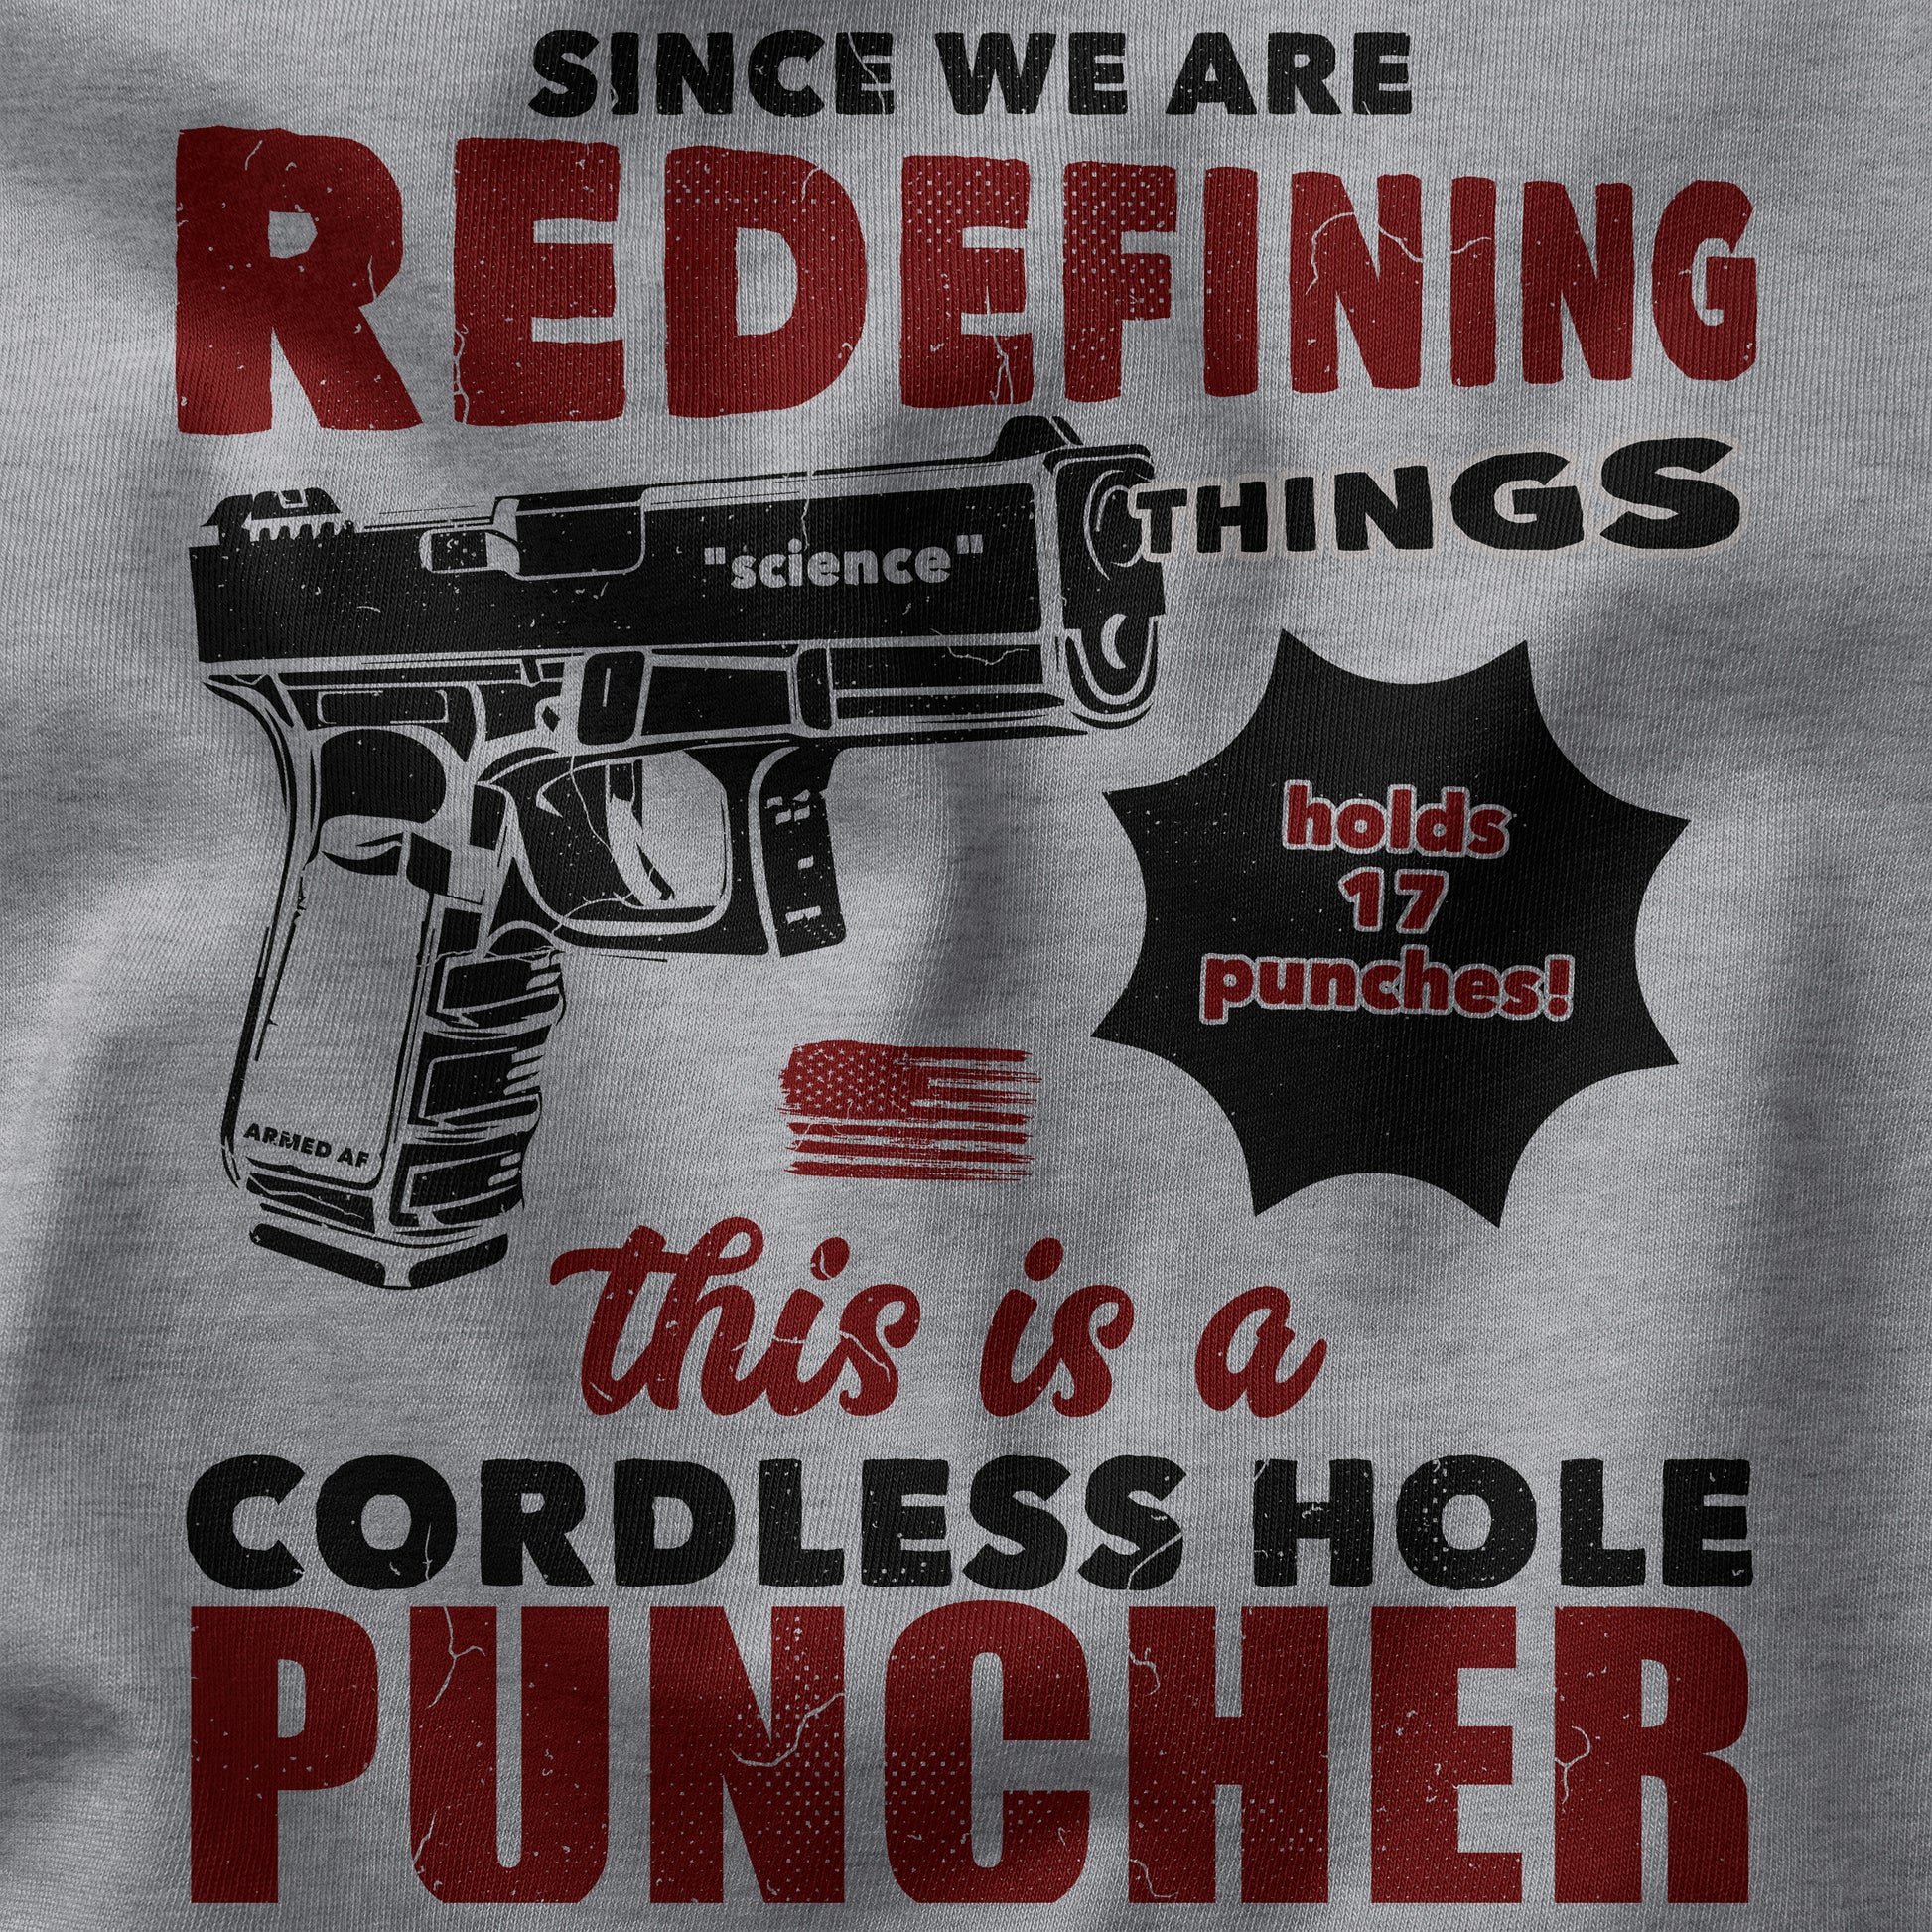 Cordless Hole Puncher t-shirt design closeup from ArmedAF®